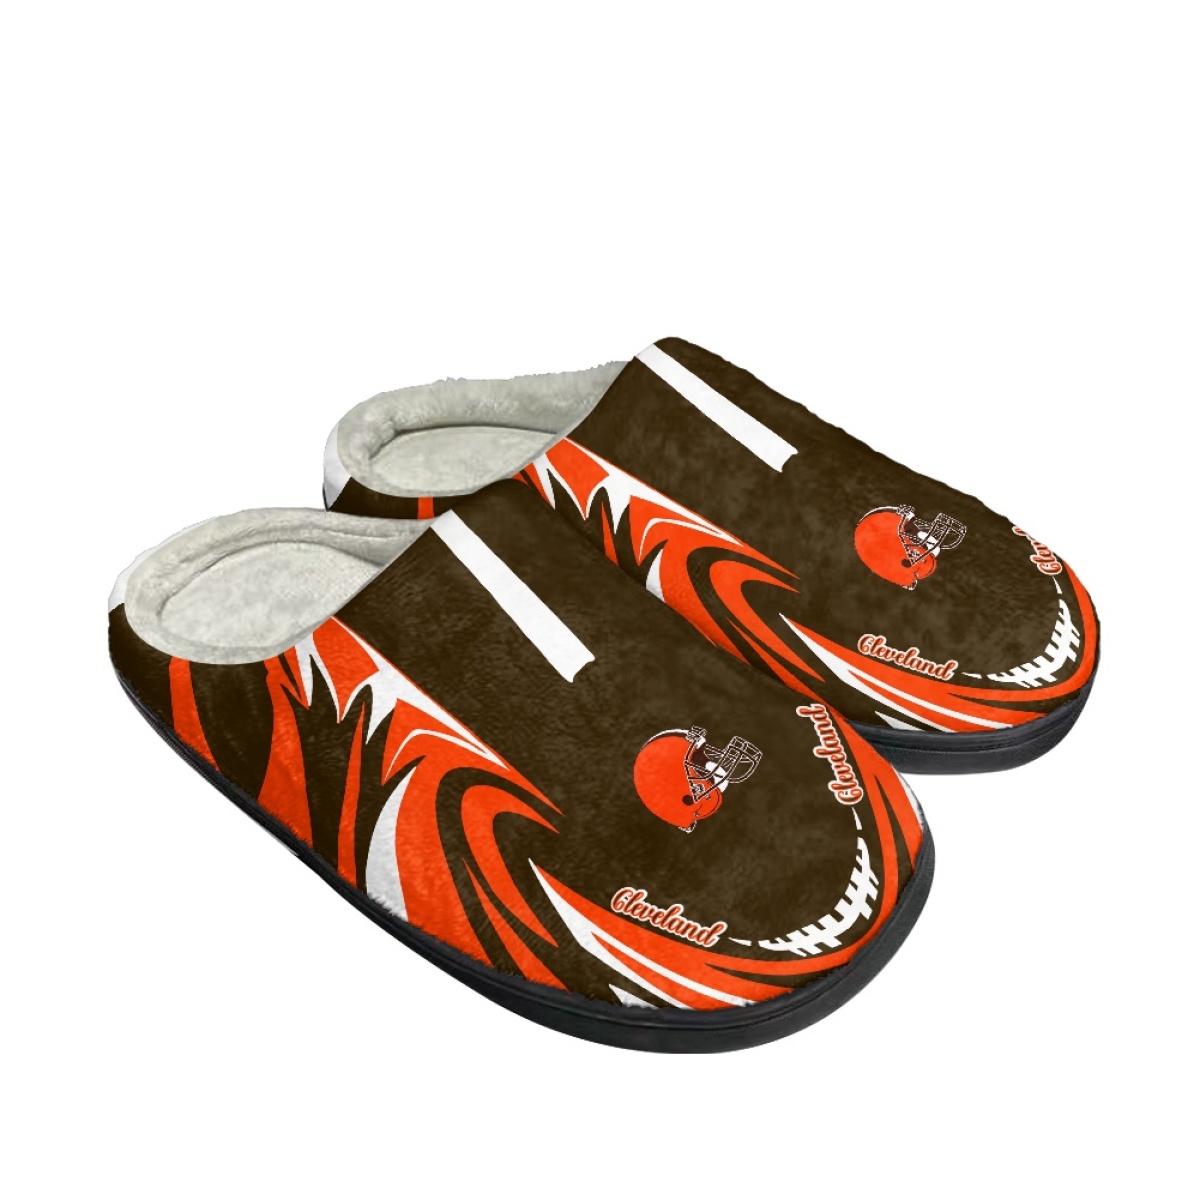 Men's Cleveland Browns Slippers/Shoes 004